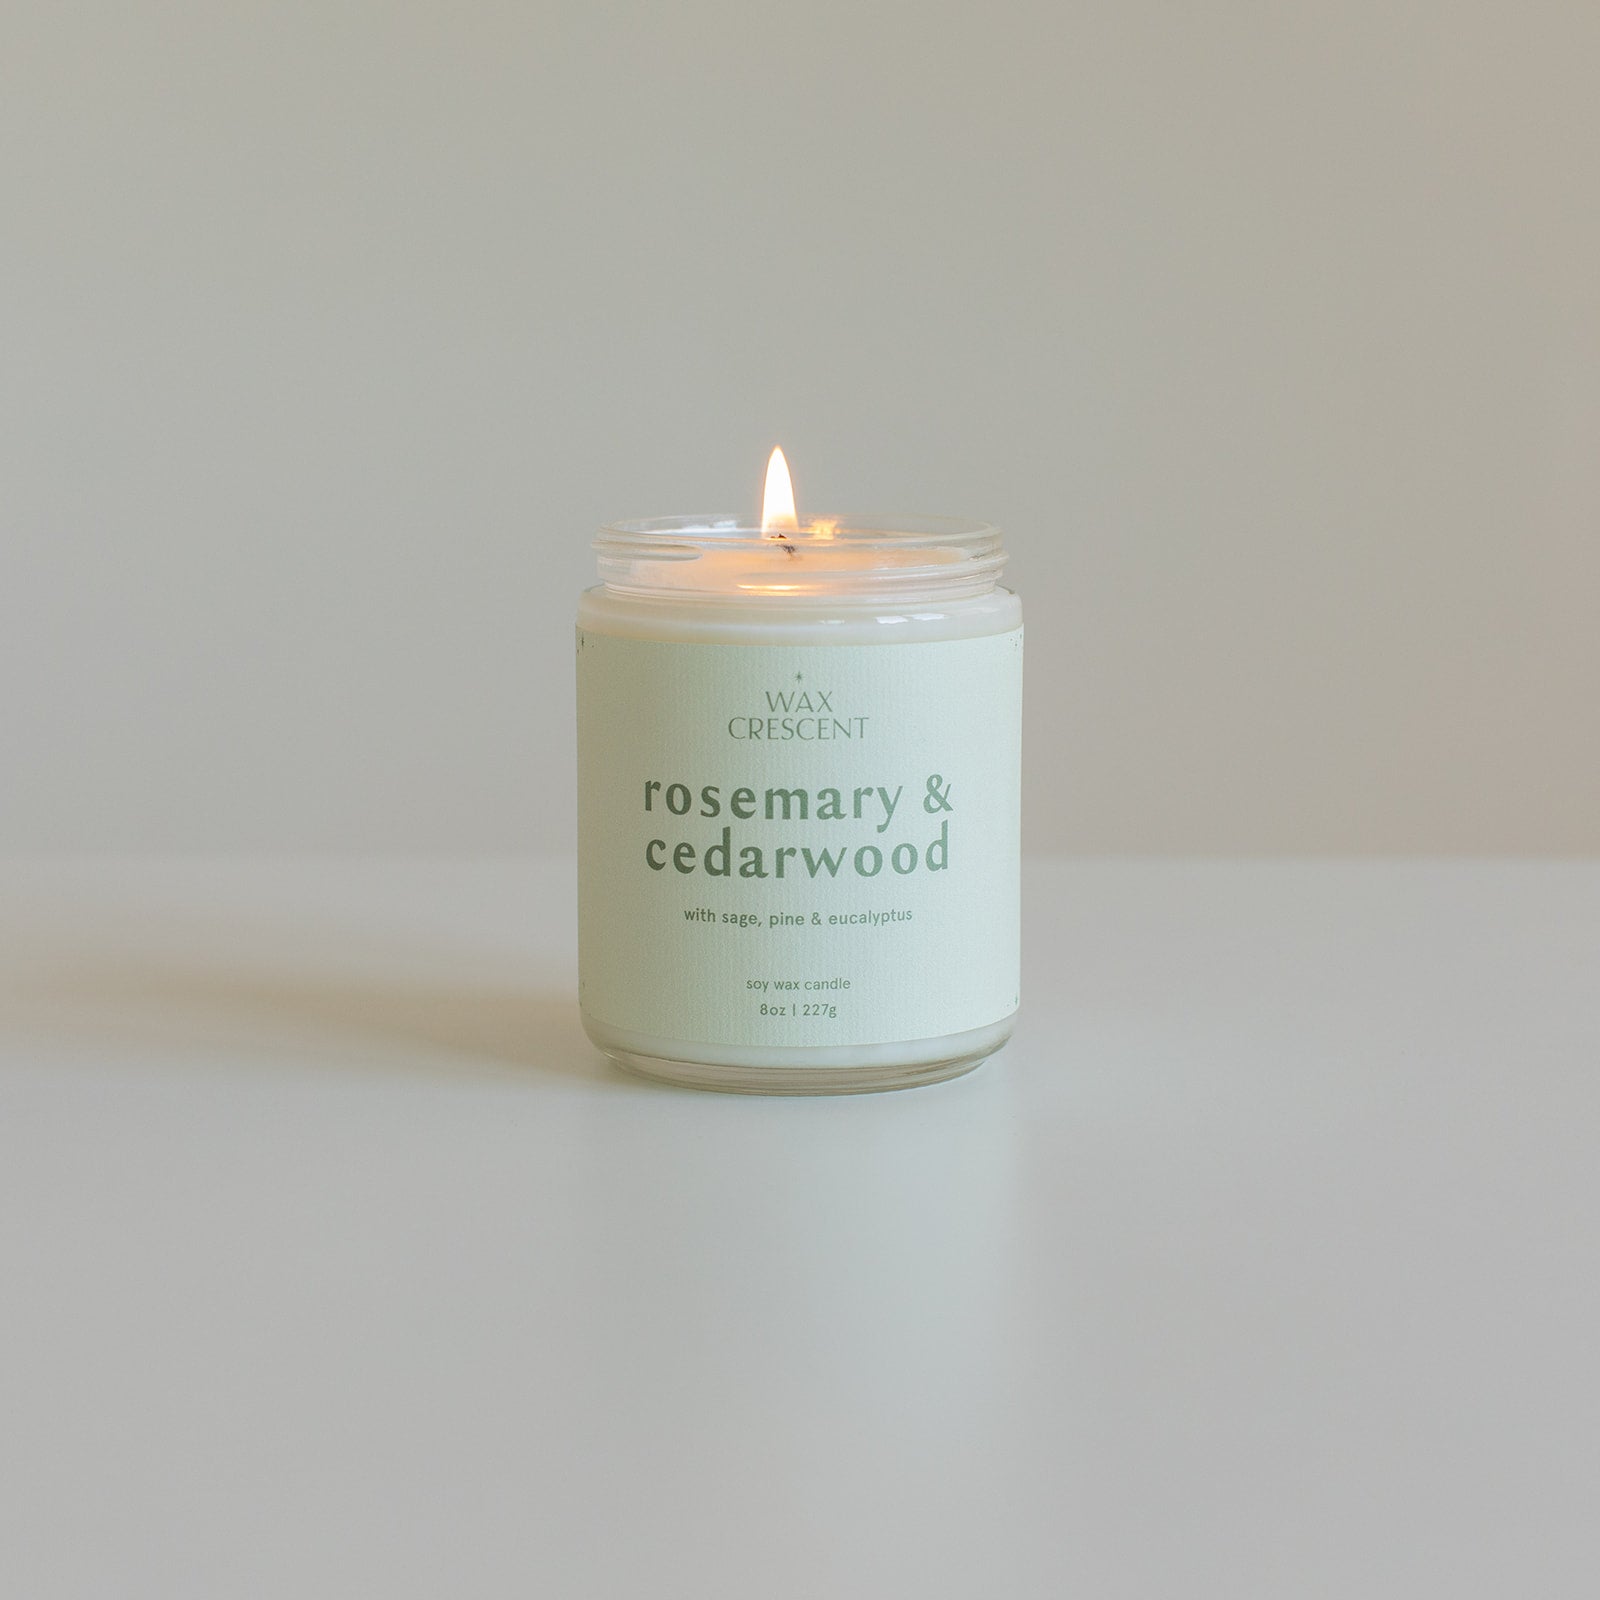 luxury soy wax candle made by Wax Crescent with non-toxic and vegan ingredients 